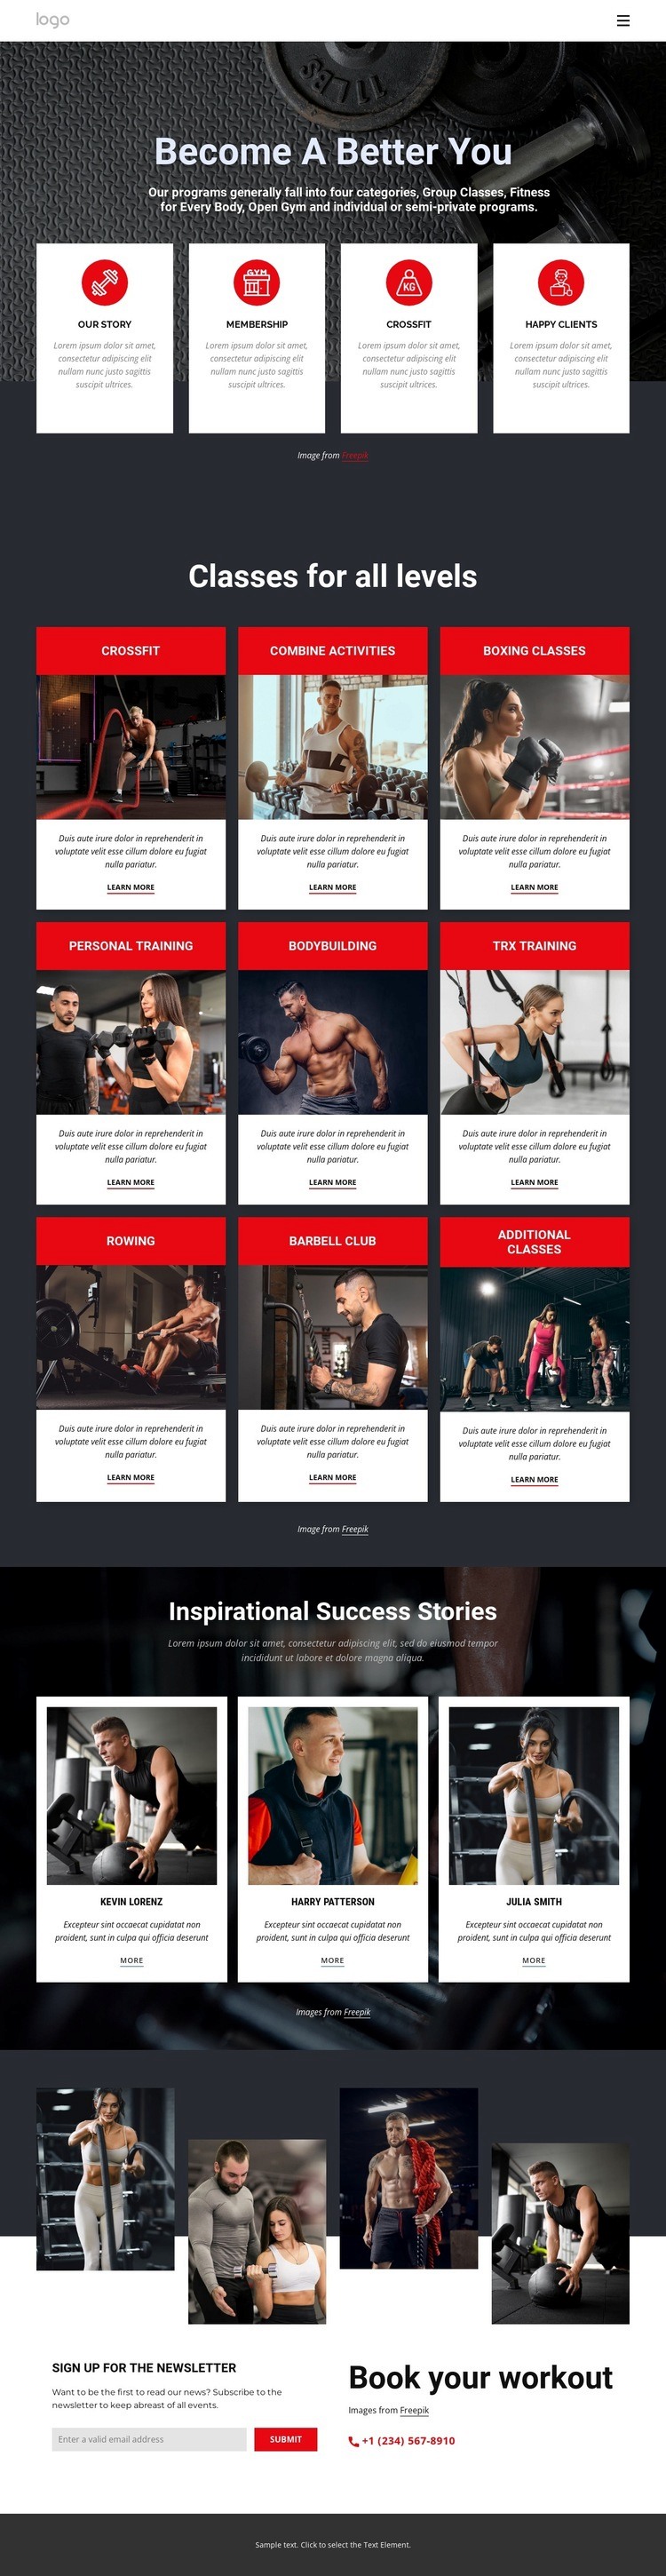 Crossfit classes for all levels Web Page Design